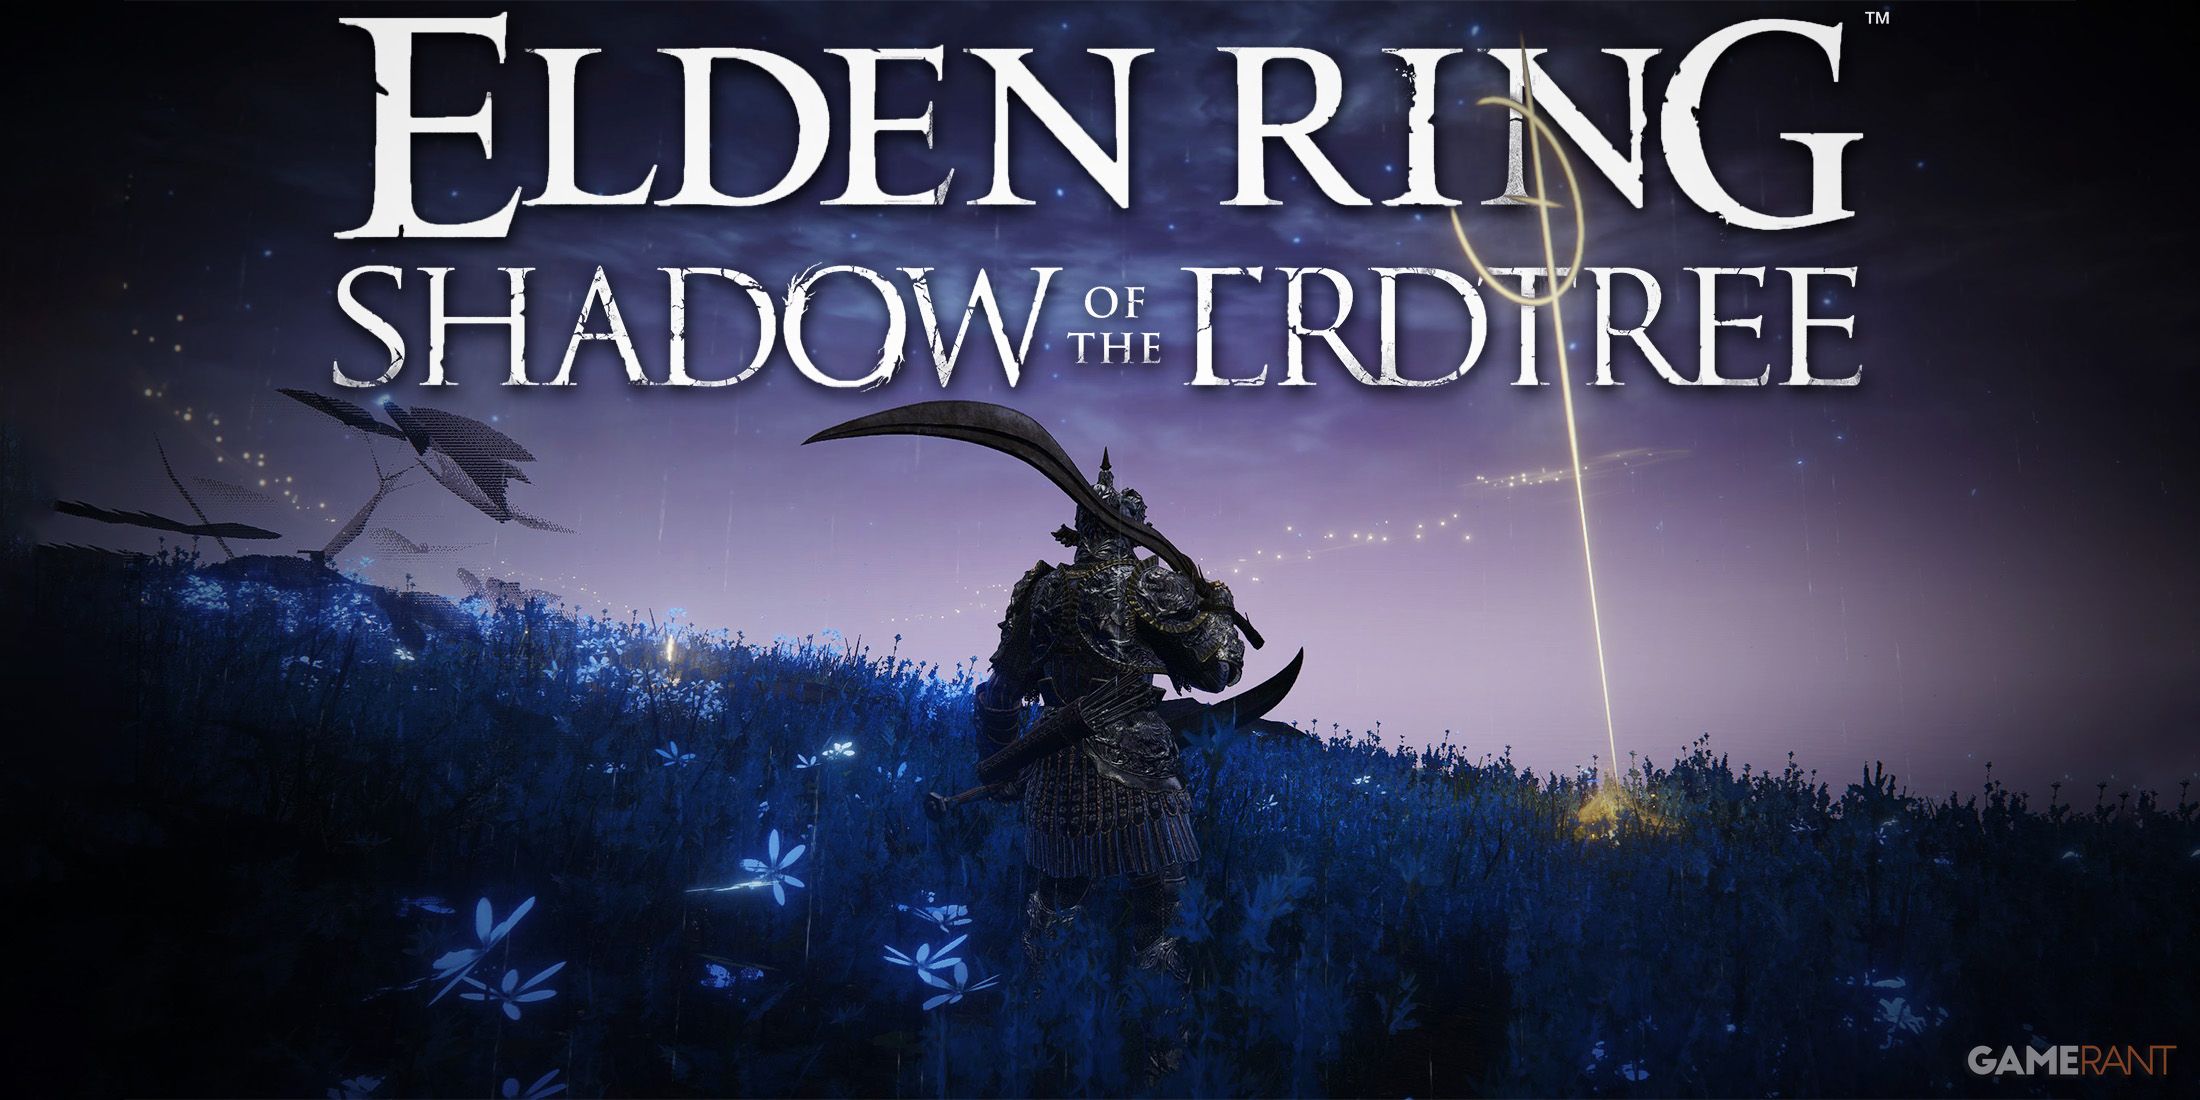 Elden Ring Shadow of the Erdtree blue flower field Miquella's cross screenshot with white game logo edit